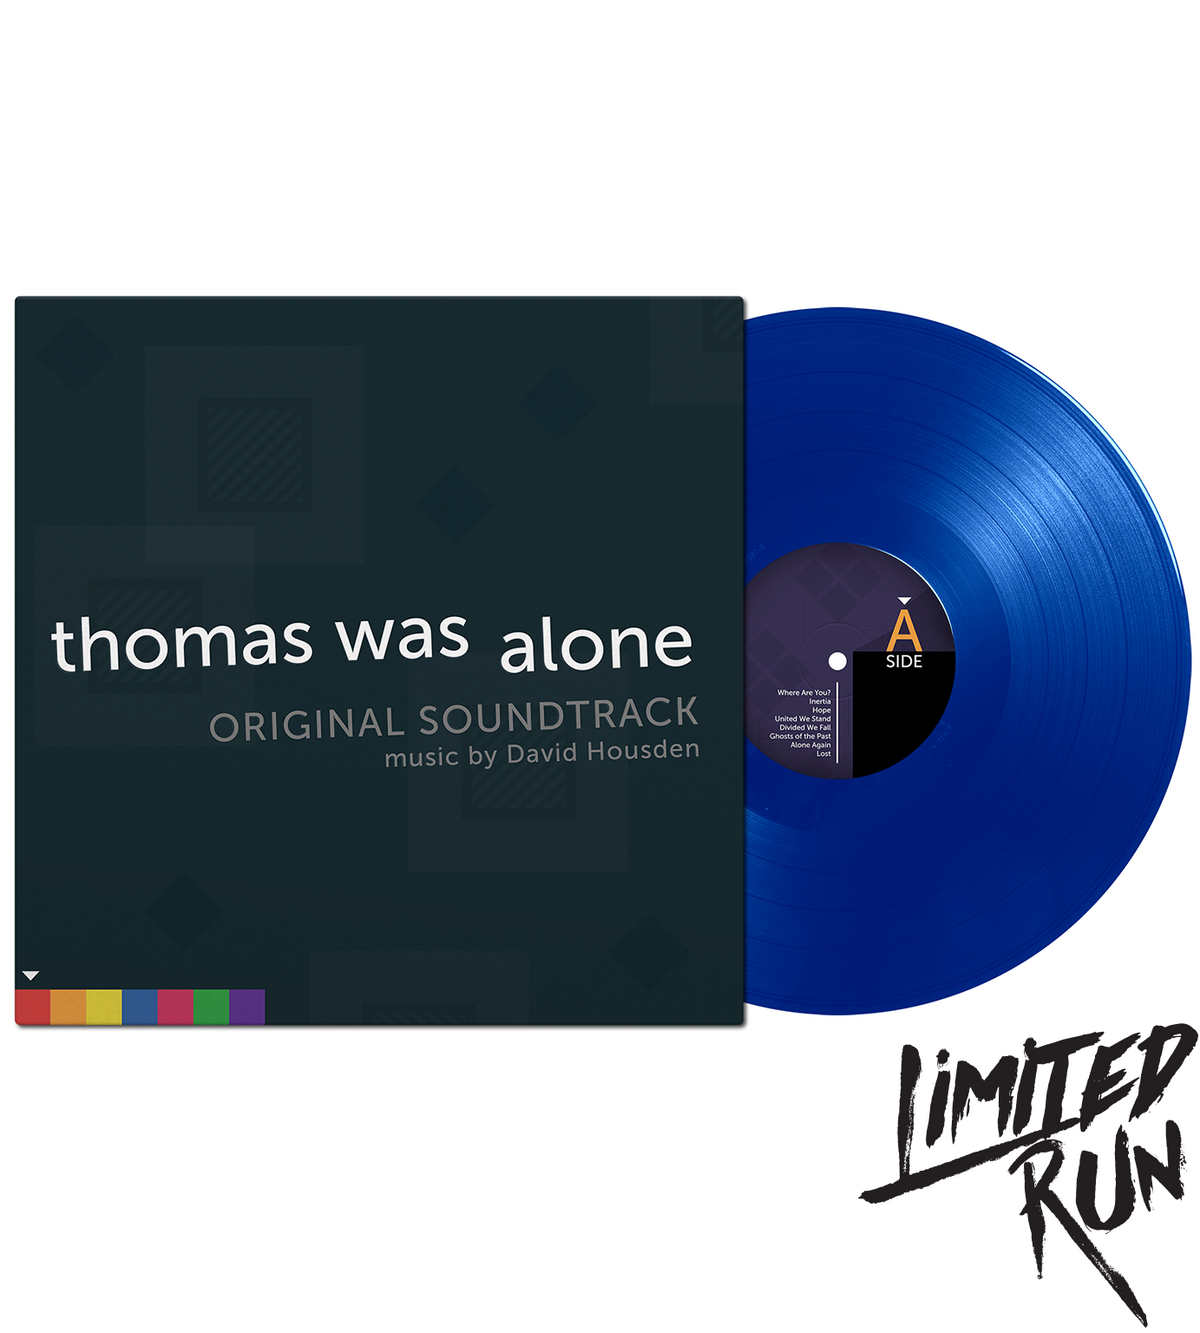 Thomas Was Alone Soundtrack Vinyl - Limited Run Exclusive